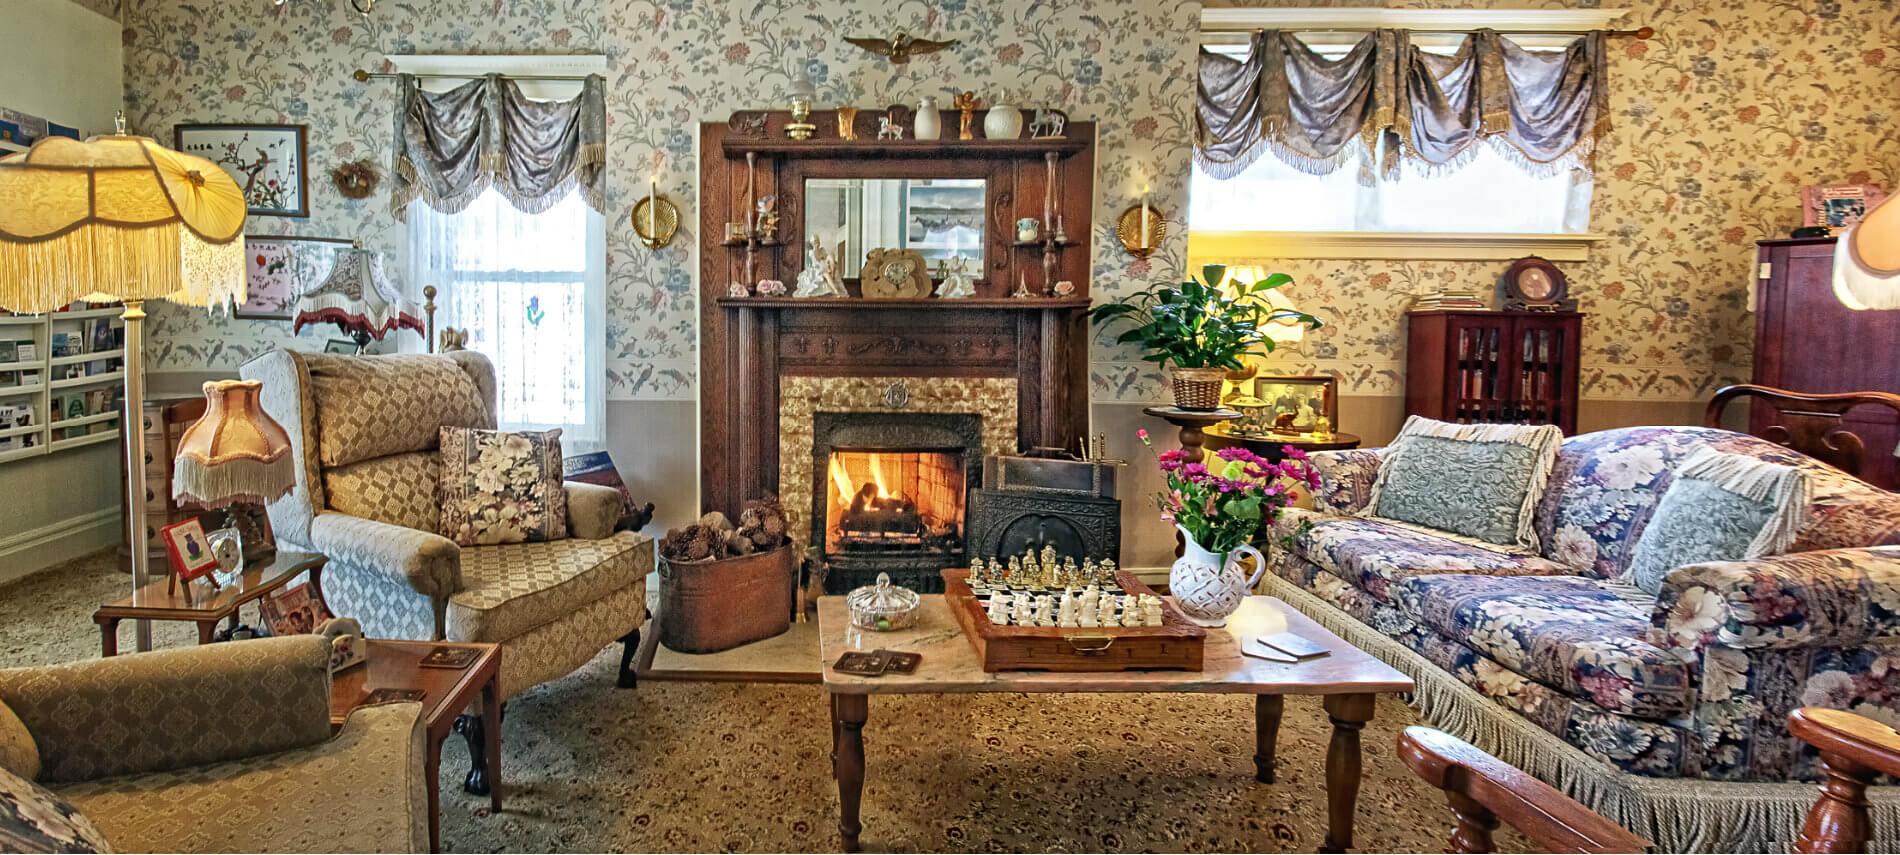 Holden House offers many places to enjoy cozy indoor relaxation and fireplaces to warm your heart. 